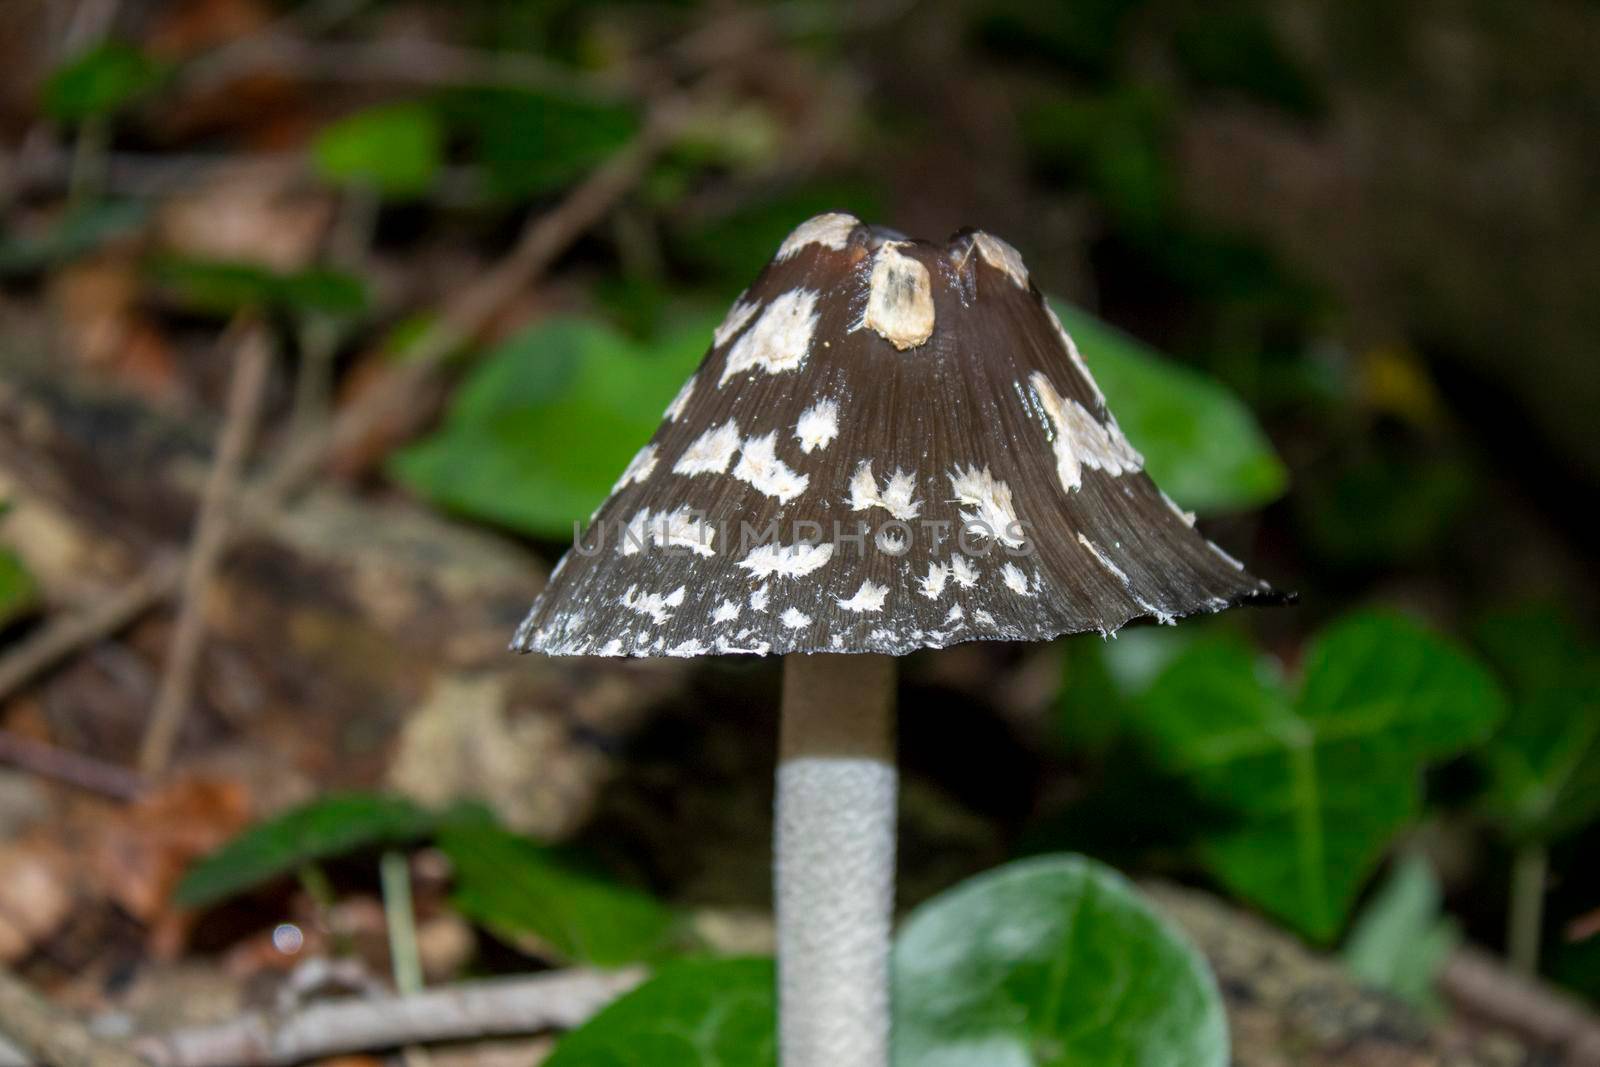 A strange brown mushroom with white spots by bybyphotography